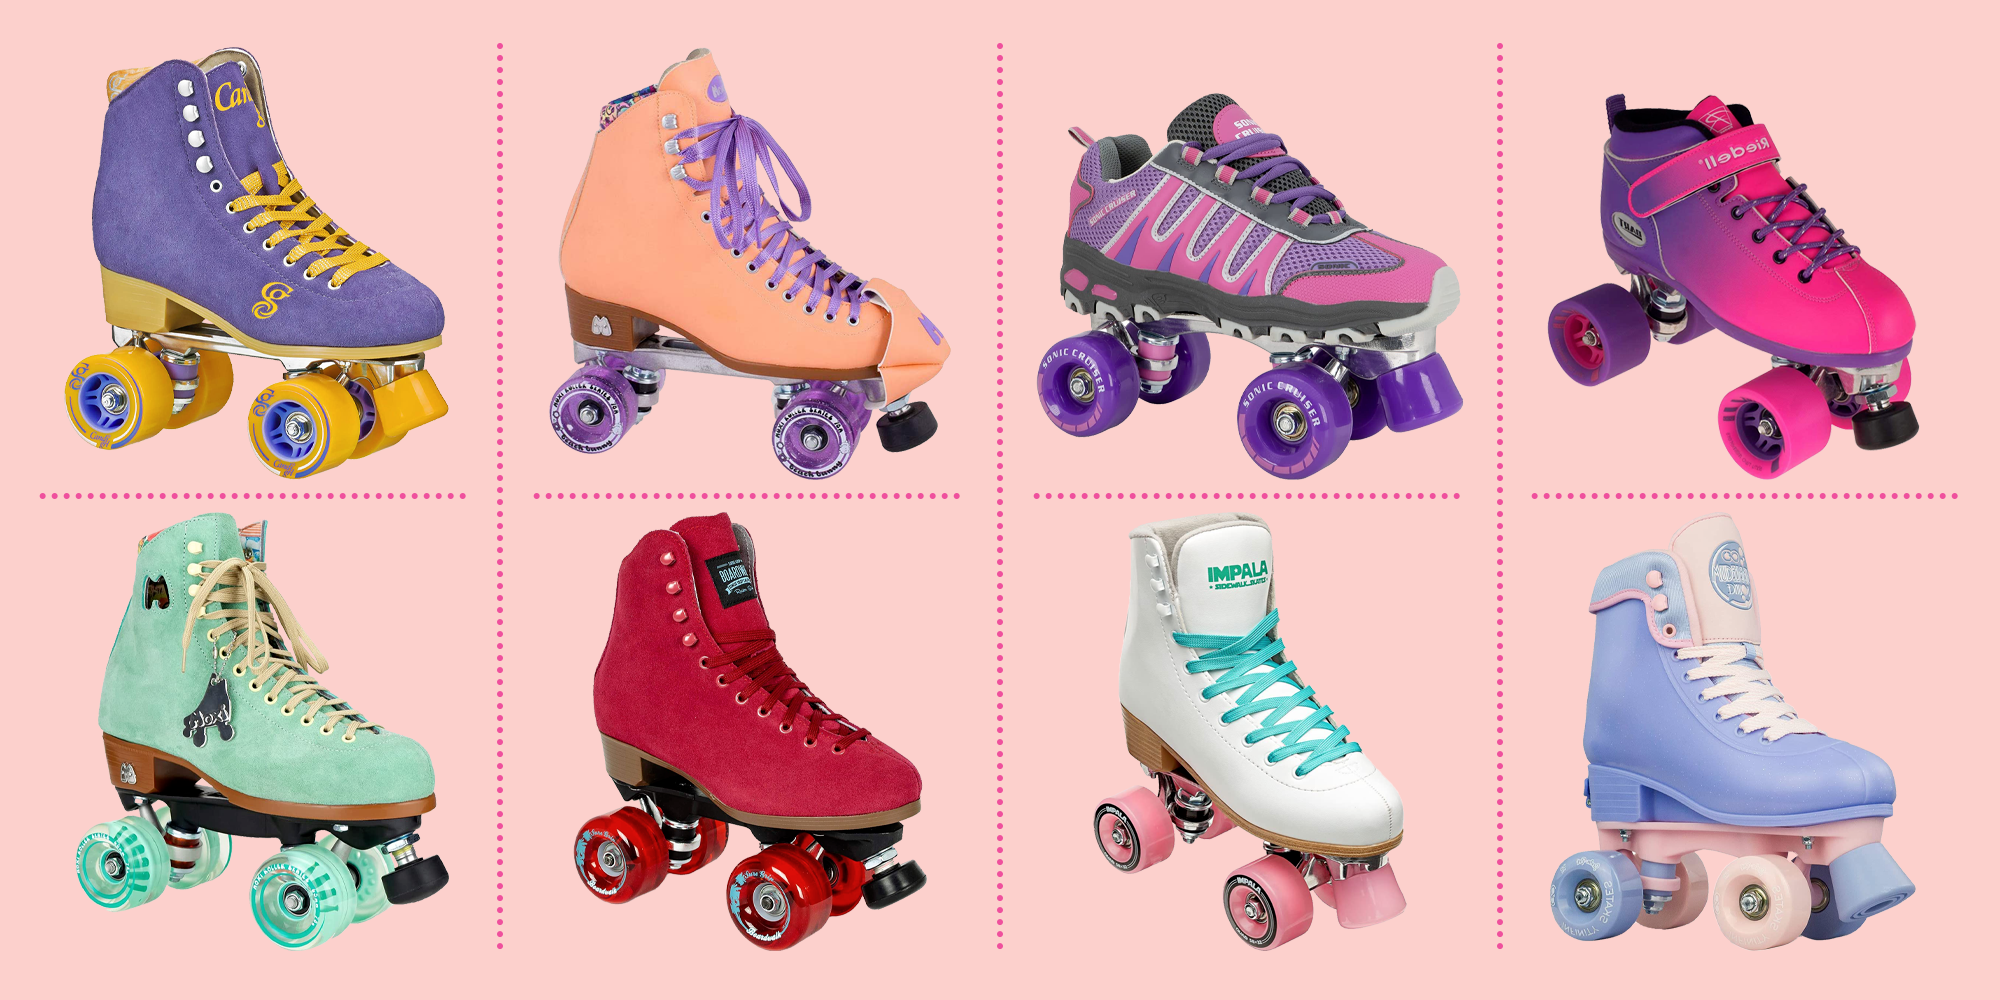 Womens Roller Skates Classic High-top Roller Skates Four-Wheel Outdoor Roller Skates Shiny Roller Skates for Women Teens Youth Boys Girls with Shoes Bag 